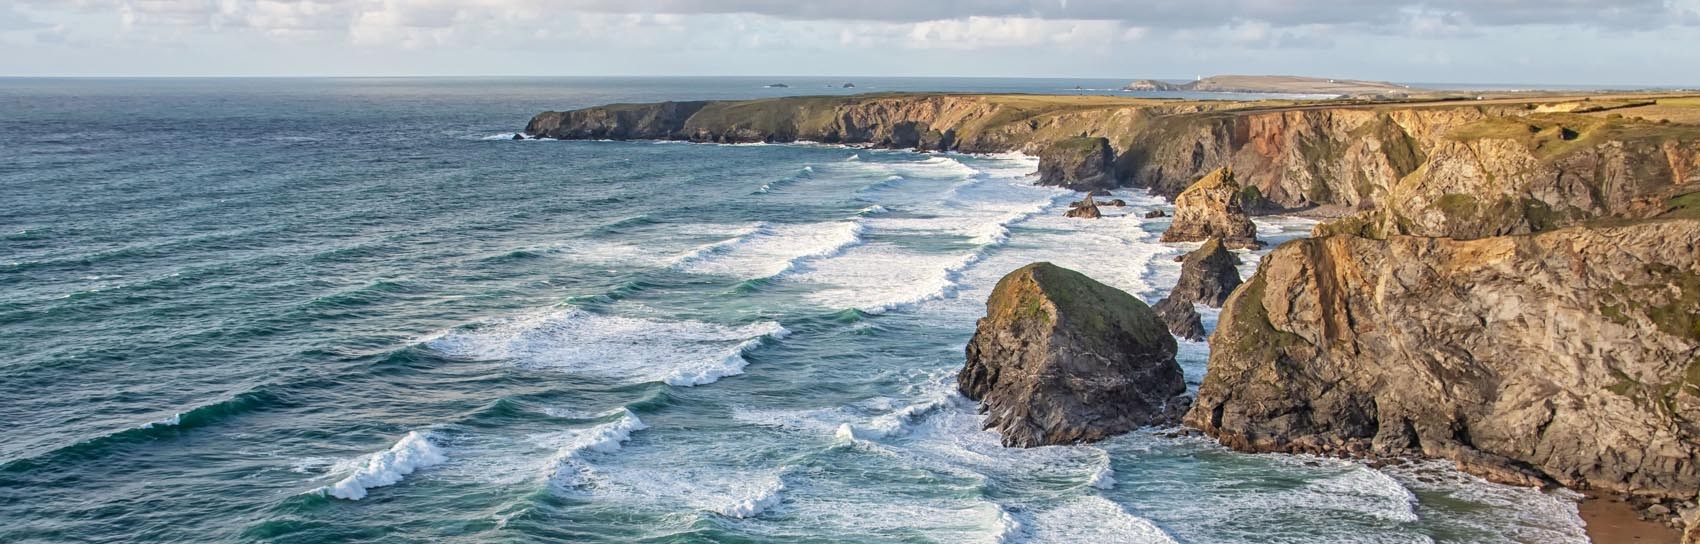 Bedruthan Steps in Cornwall. Photograph by ALEX GRAEME